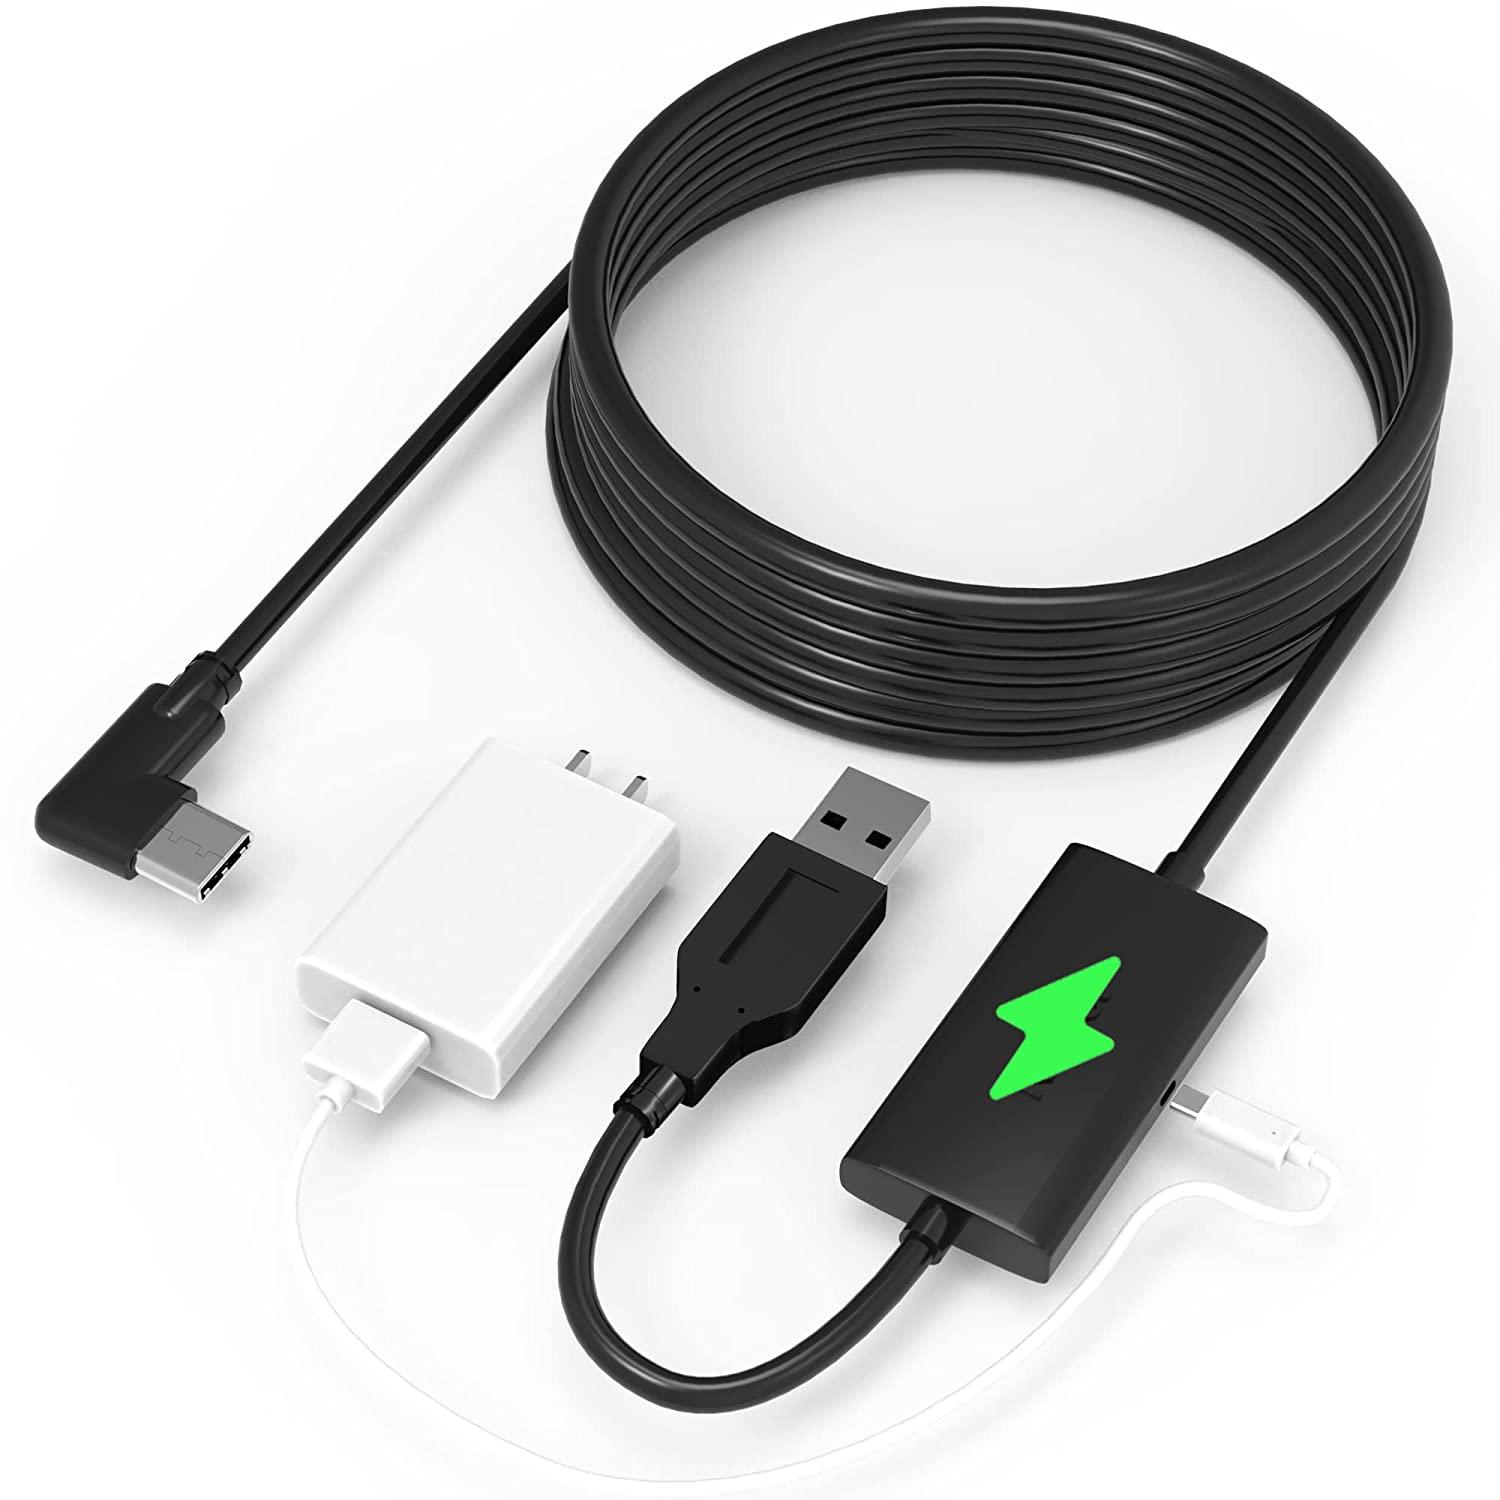 Oculus Quest 2 16ft Link Cable with Charging Port for $16.99